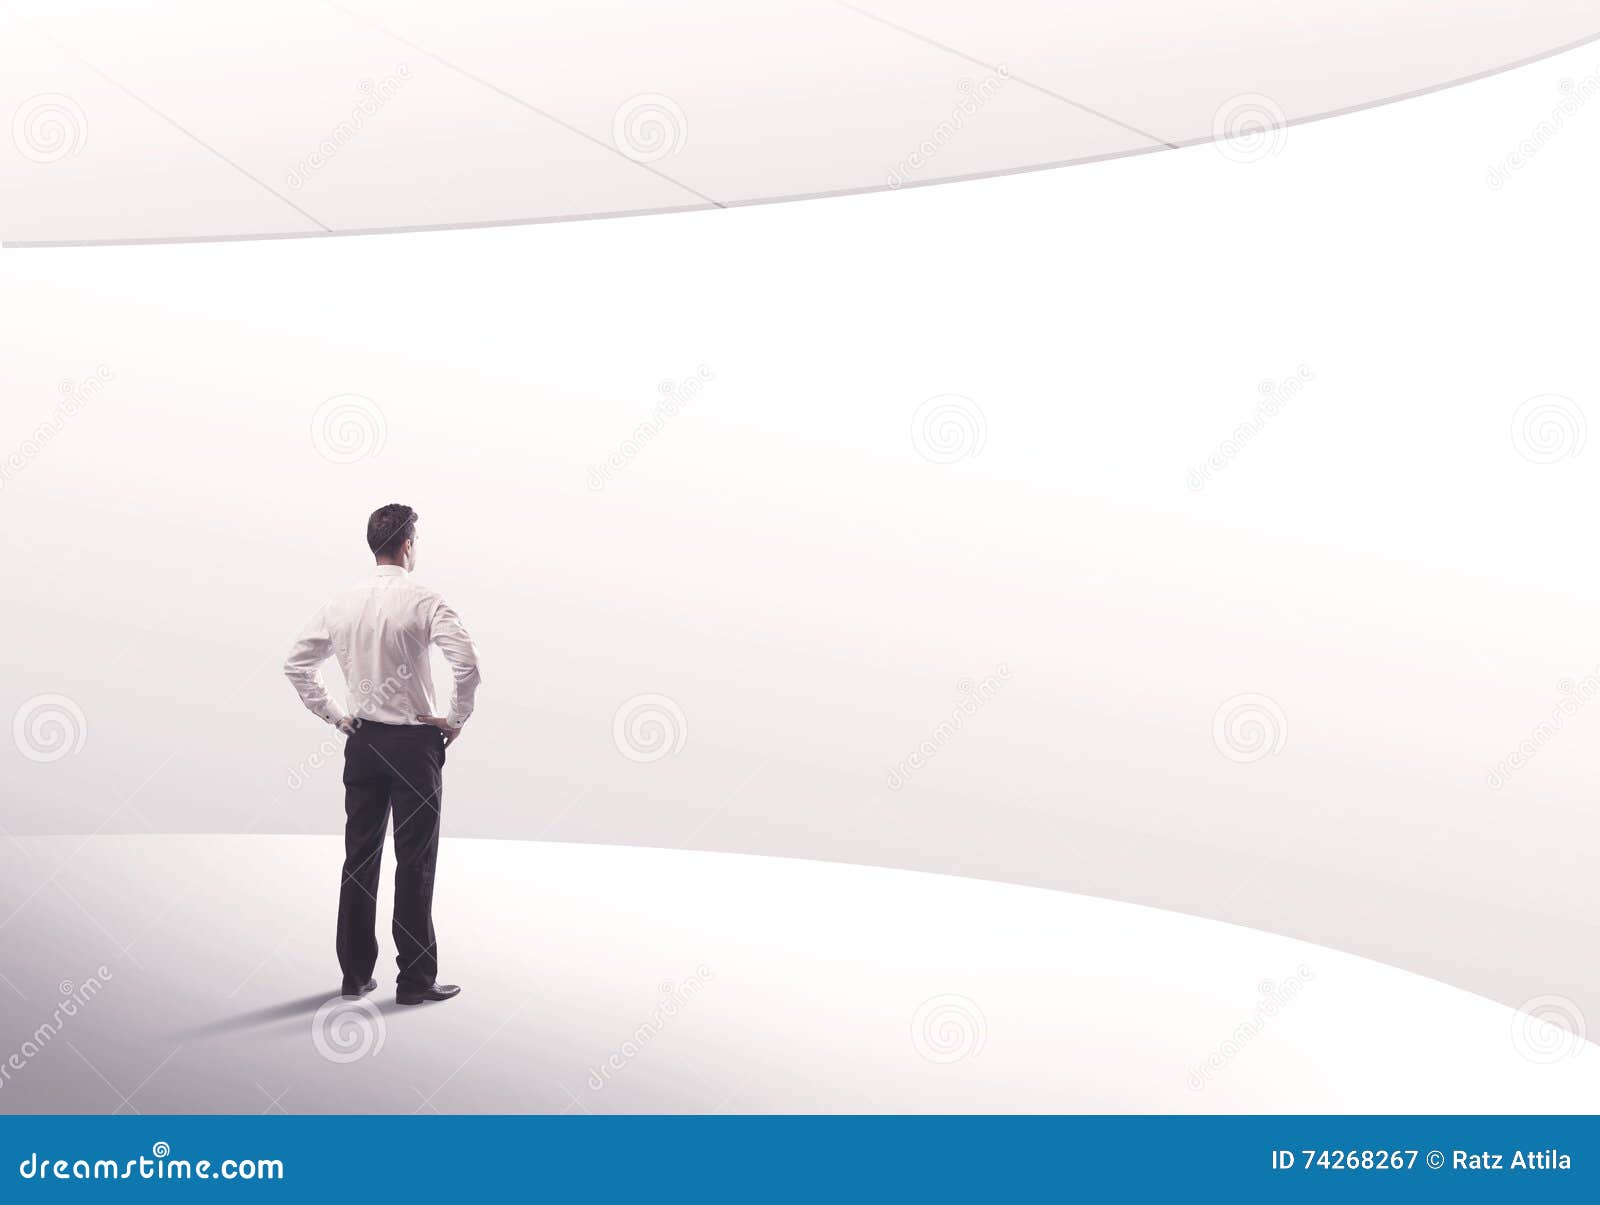 Wallpaper ID 277368  real salesman heading to pitch 4k wallpaper free  download